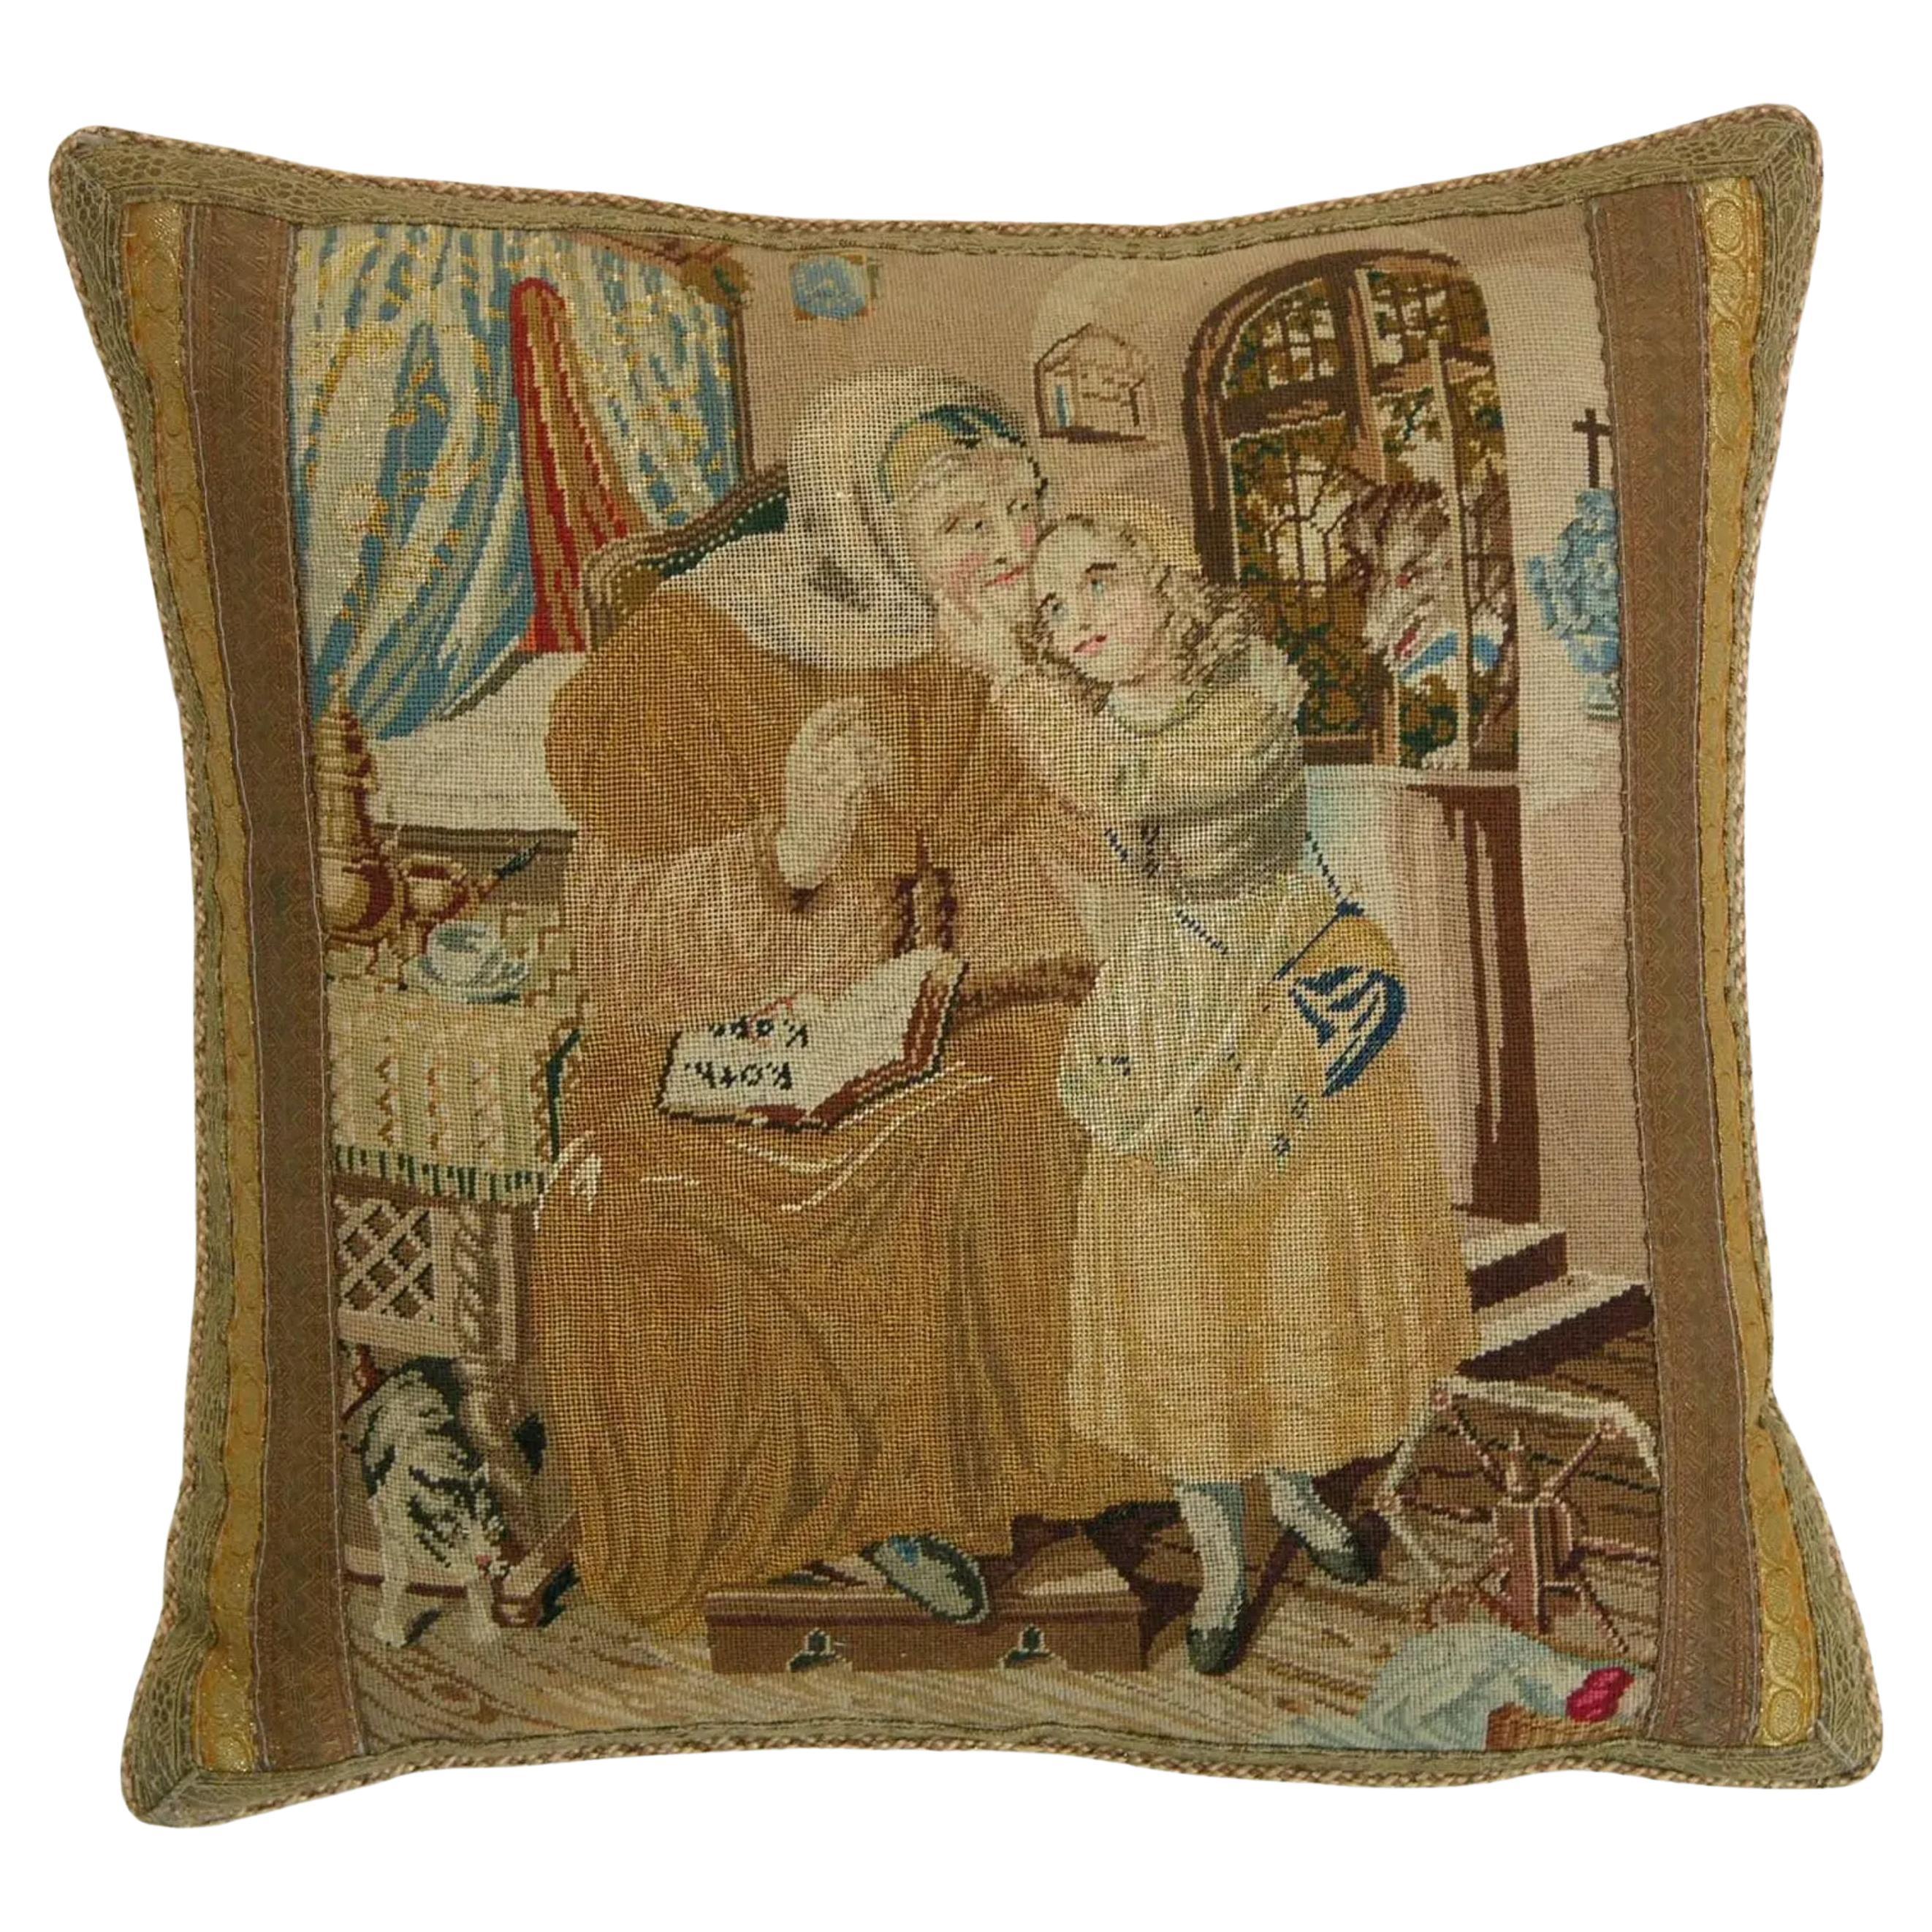 1850 English Needle Work Tapestry Pillow - 17'' X 17'' For Sale